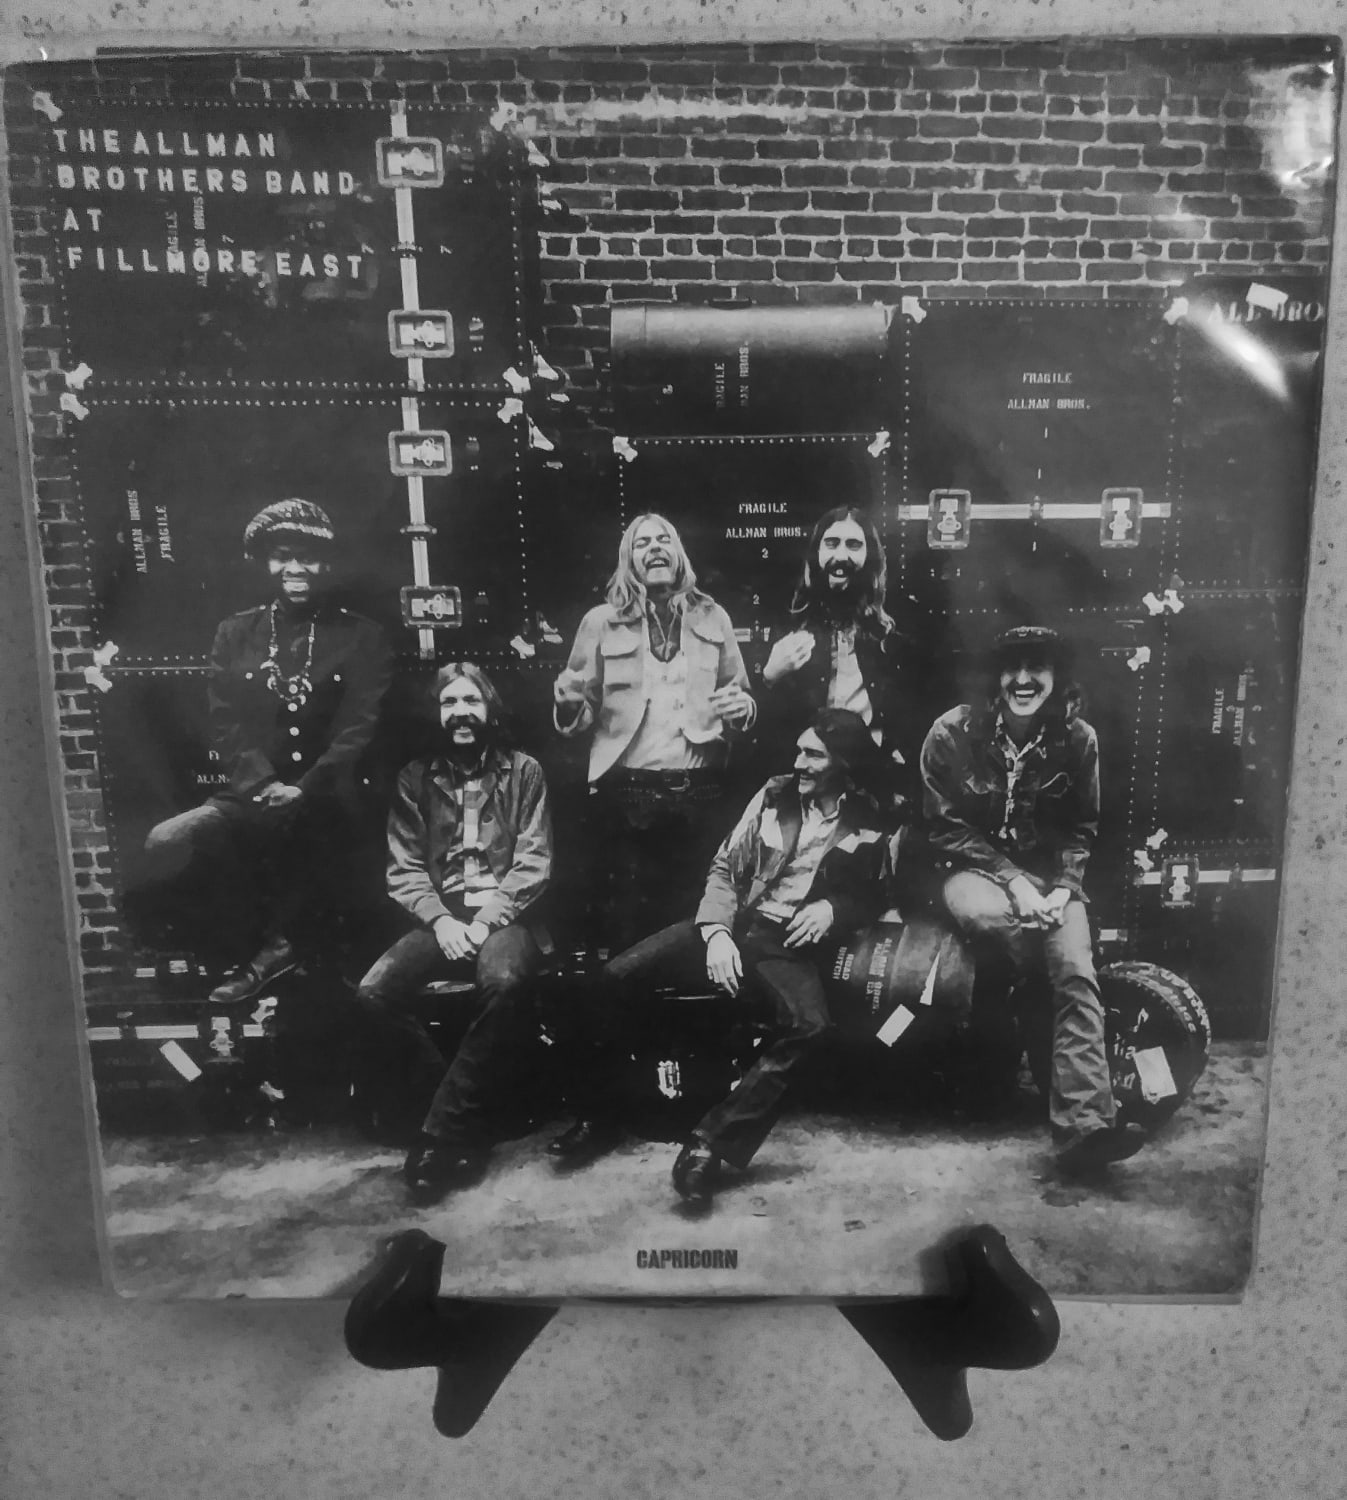 The Allman Brothers Band - Live at Fillmore East - 1971 "pink label" first pressing